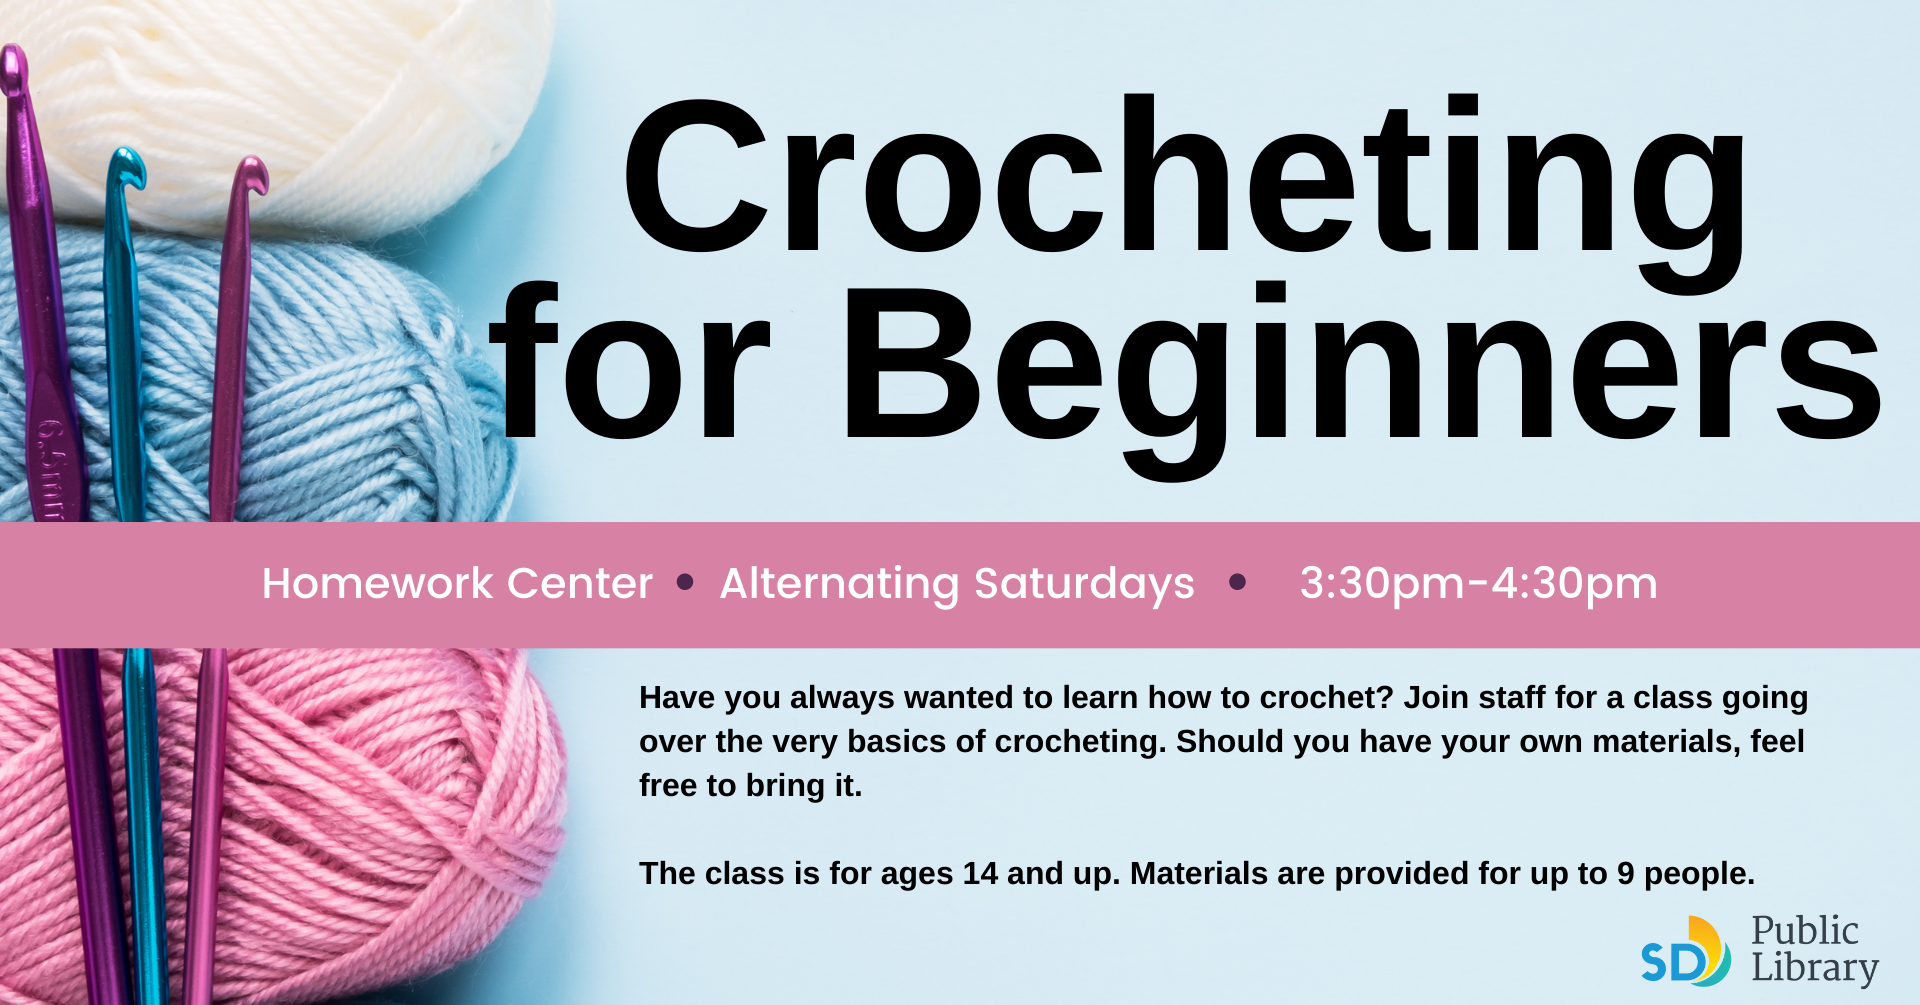 Crocheting for Beginners Have you always wanted to learn how to crochet? Join staff for a class going over the very basics of crocheting. Should you have your own materials, feel free to bring it.   The class is for ages 14 and up. Materials are provided for up to 9 people.  Homework Center     Select Saturdays        3:30pm-4:30pm · ·